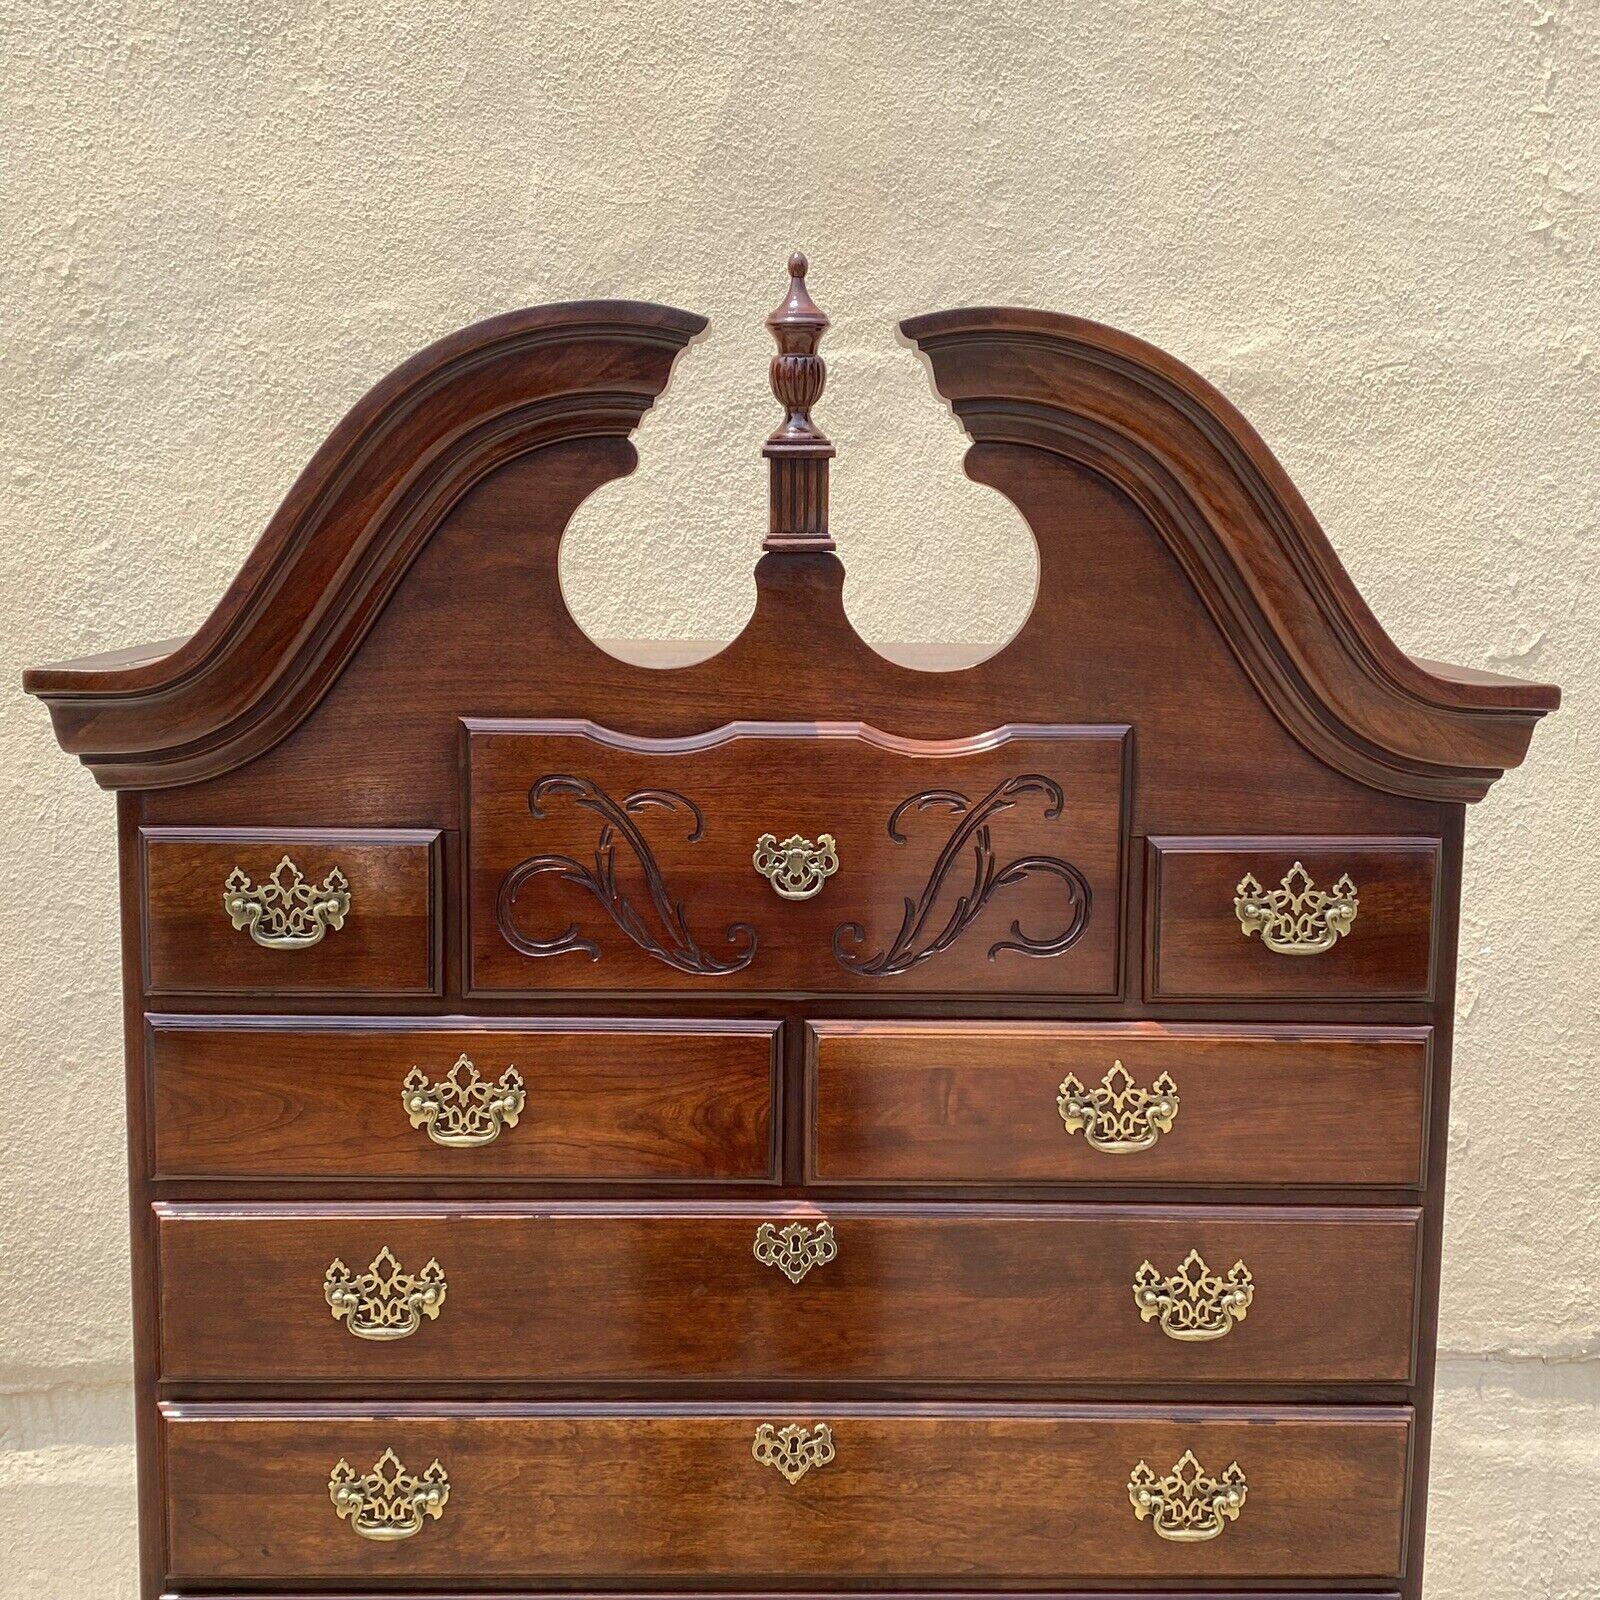 Thomasville Cherry Wood Queen Anne Style Highyboy Tall Chest Dresser In Good Condition For Sale In Philadelphia, PA